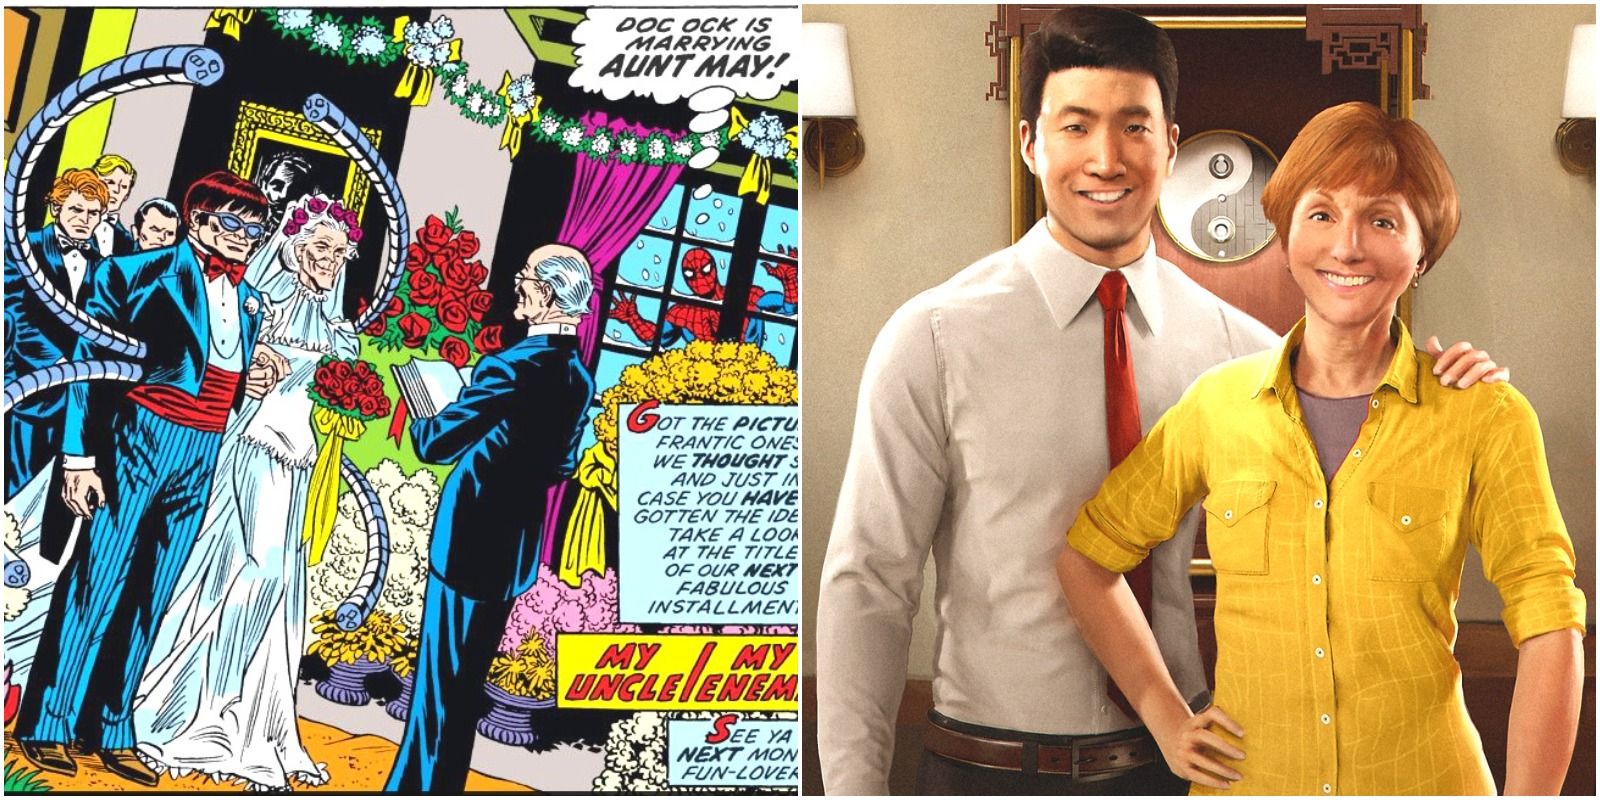 Aunt May almost marrying Dr. Octopus and Aunt May with Mr. Negative